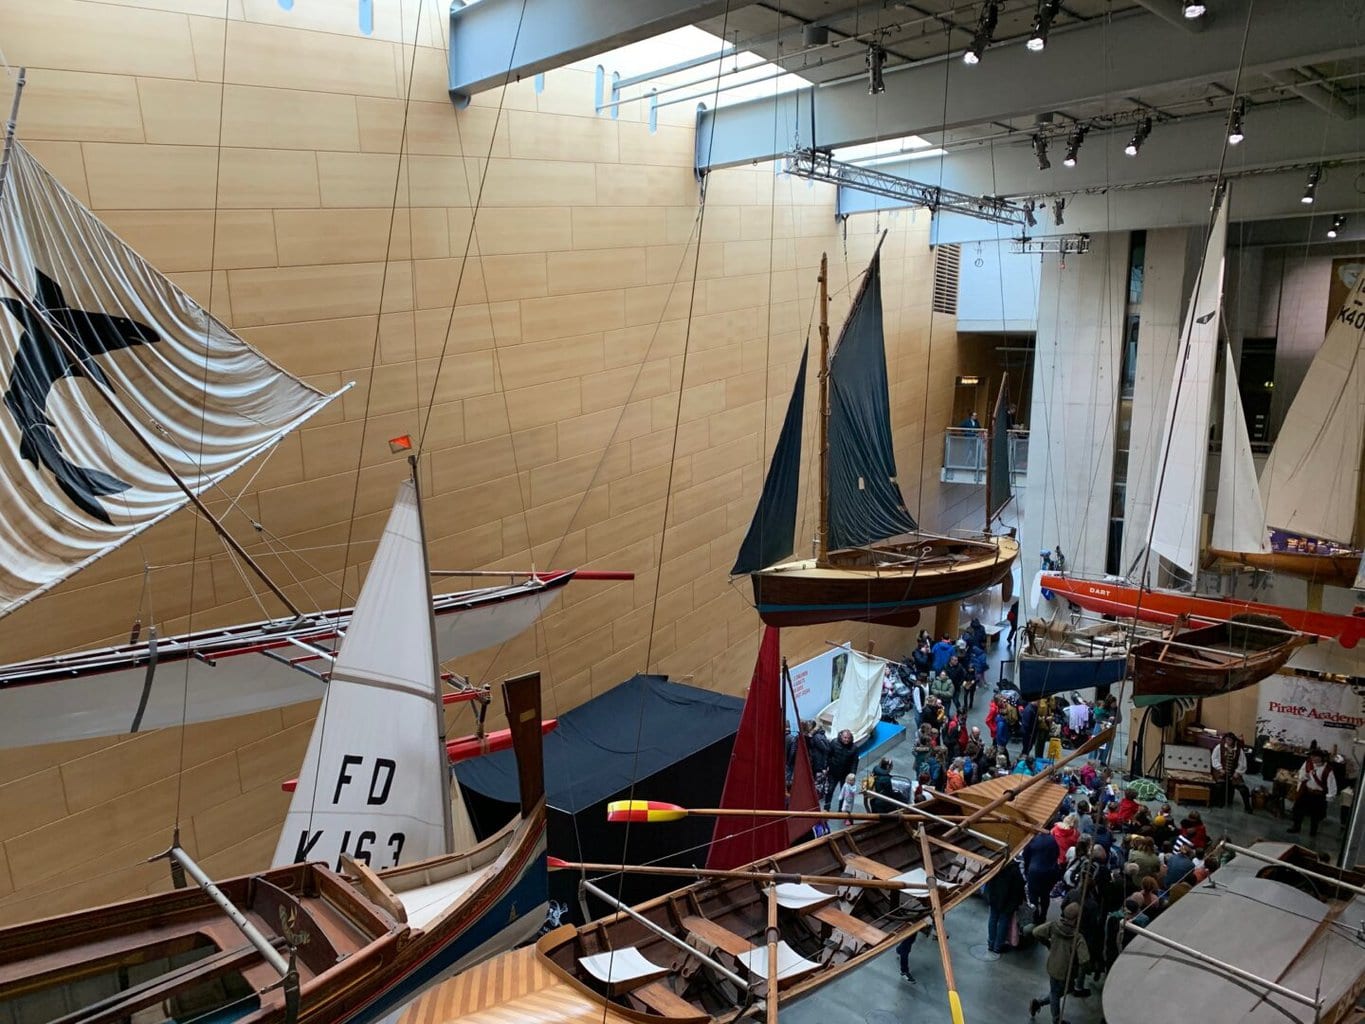 We visited the National Maritime Museum Cornwall on a very rainy day during the Easter holidays. The queue out of the door was the first indication that it was a popular family attraction!